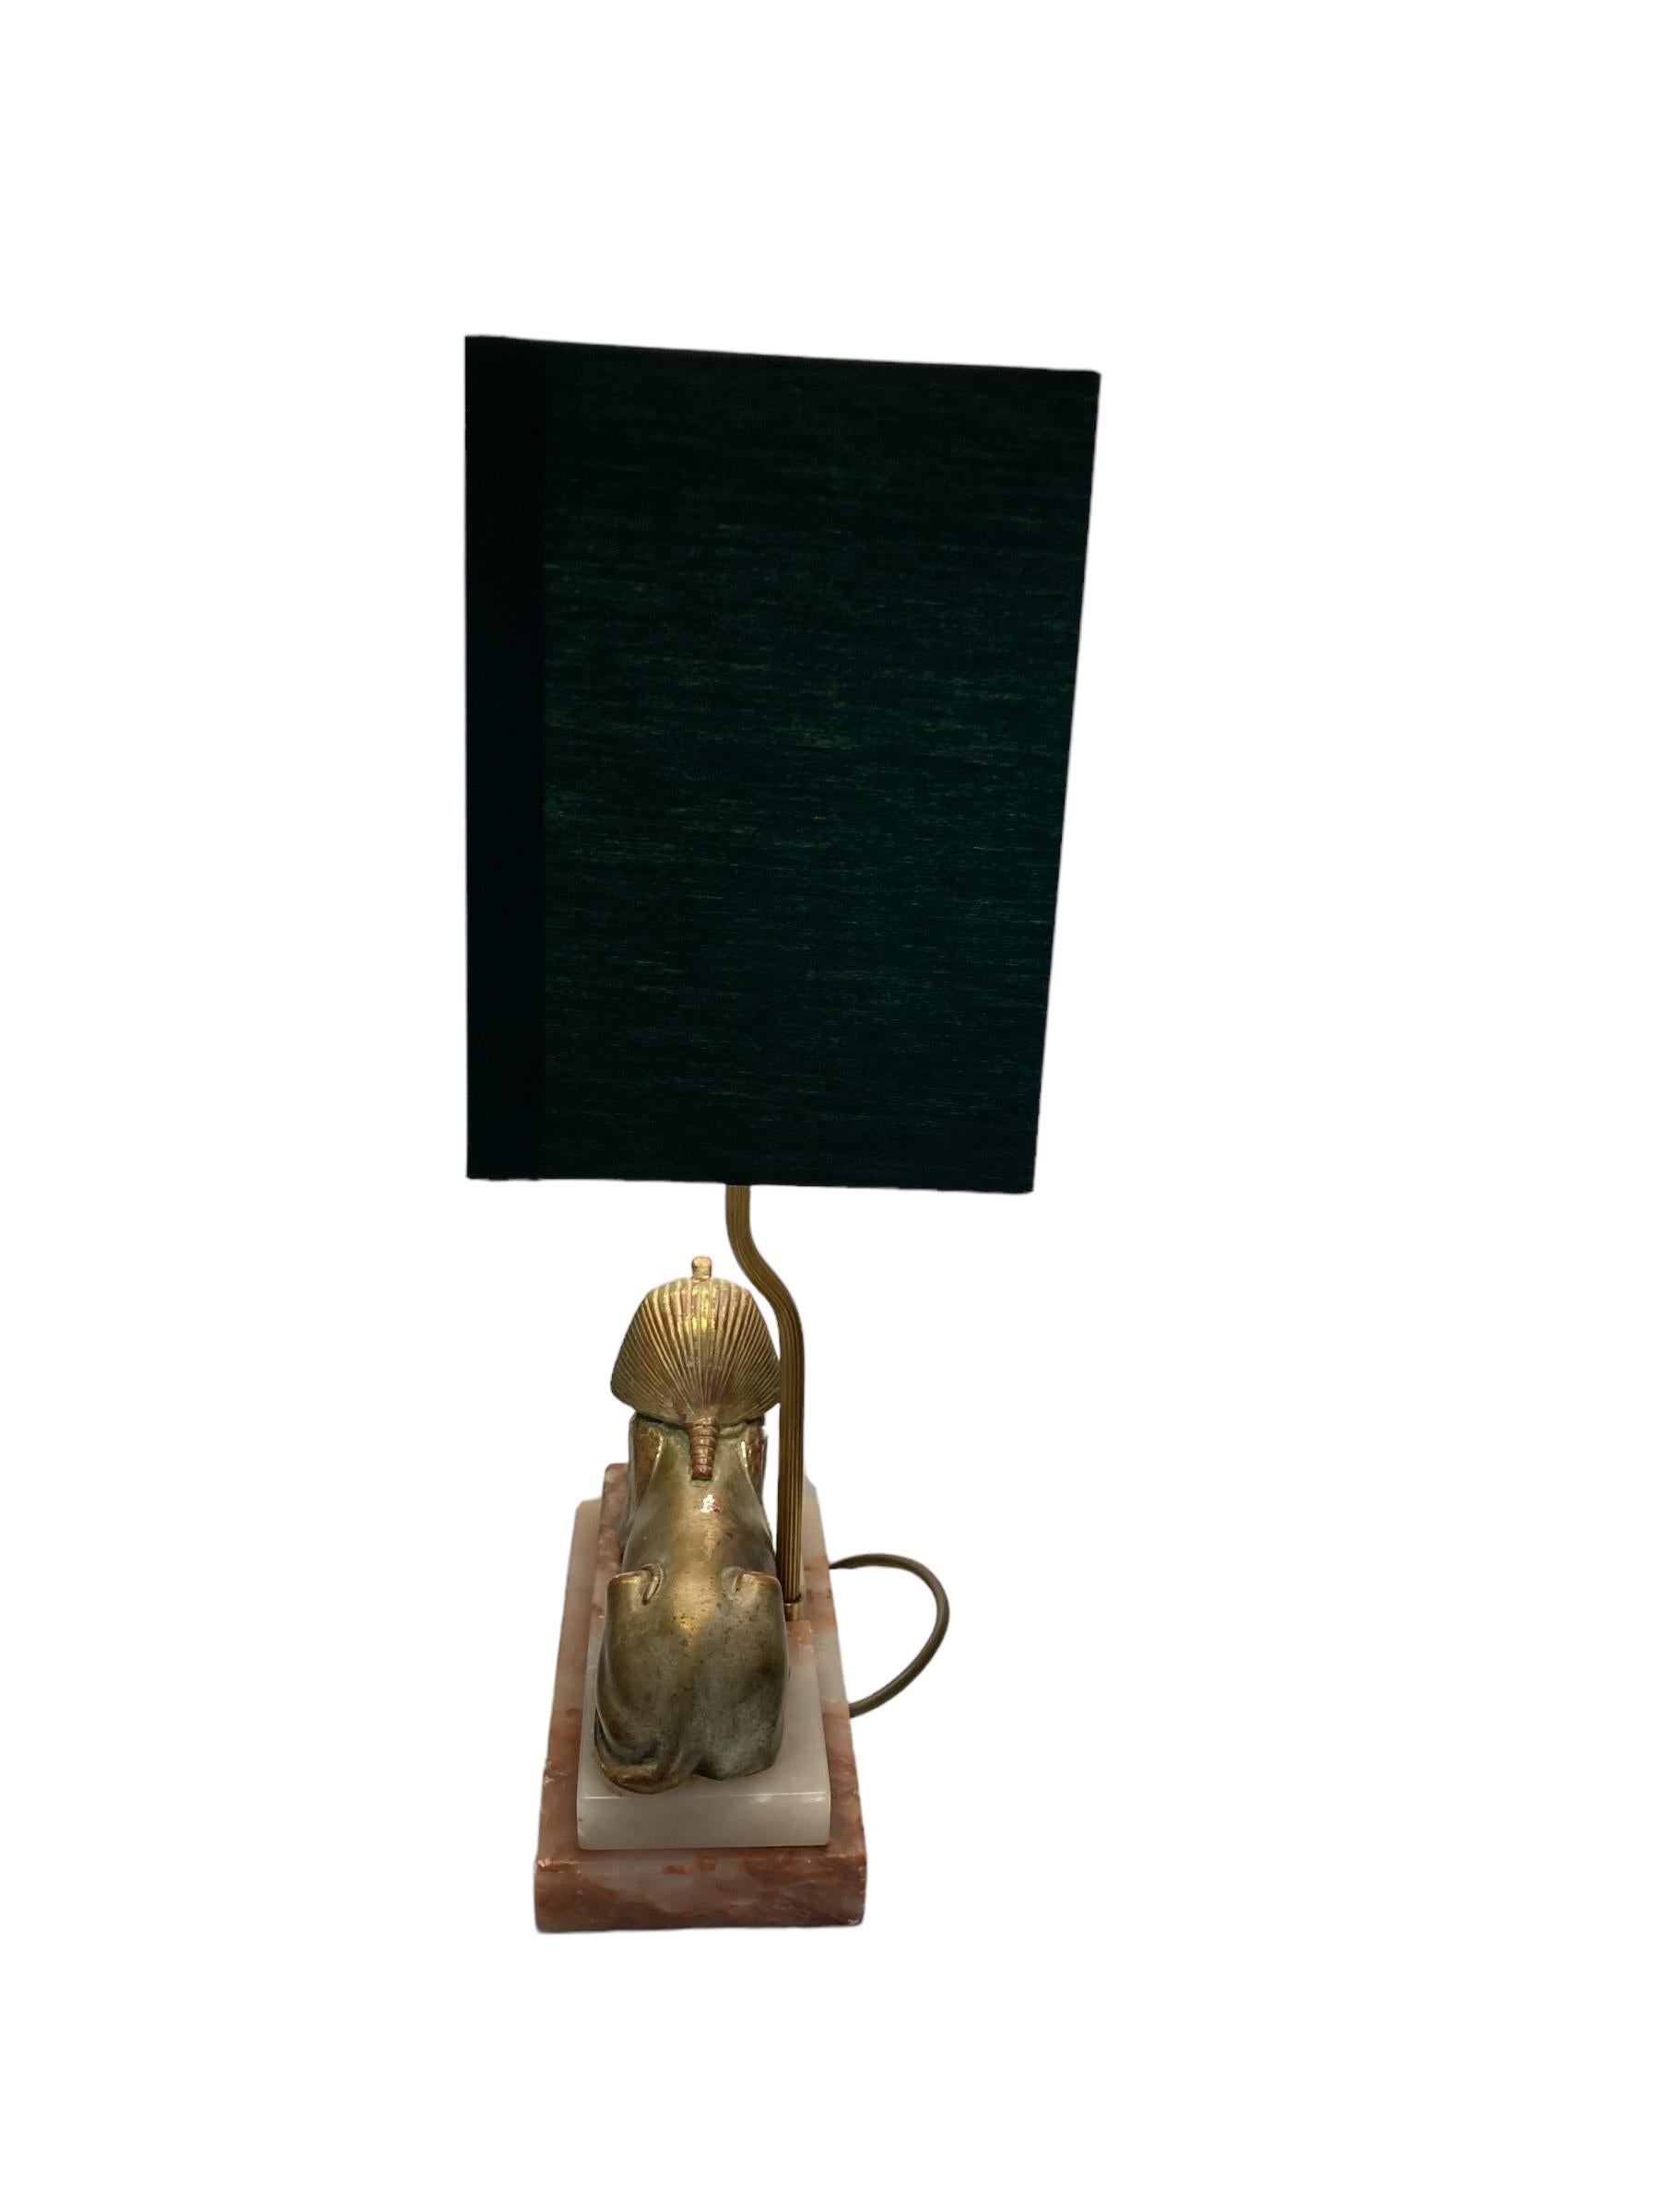 A Pair of Art Deco Egytian Sphinx Table Lamps on a Marble Base Dark Green Shades 1